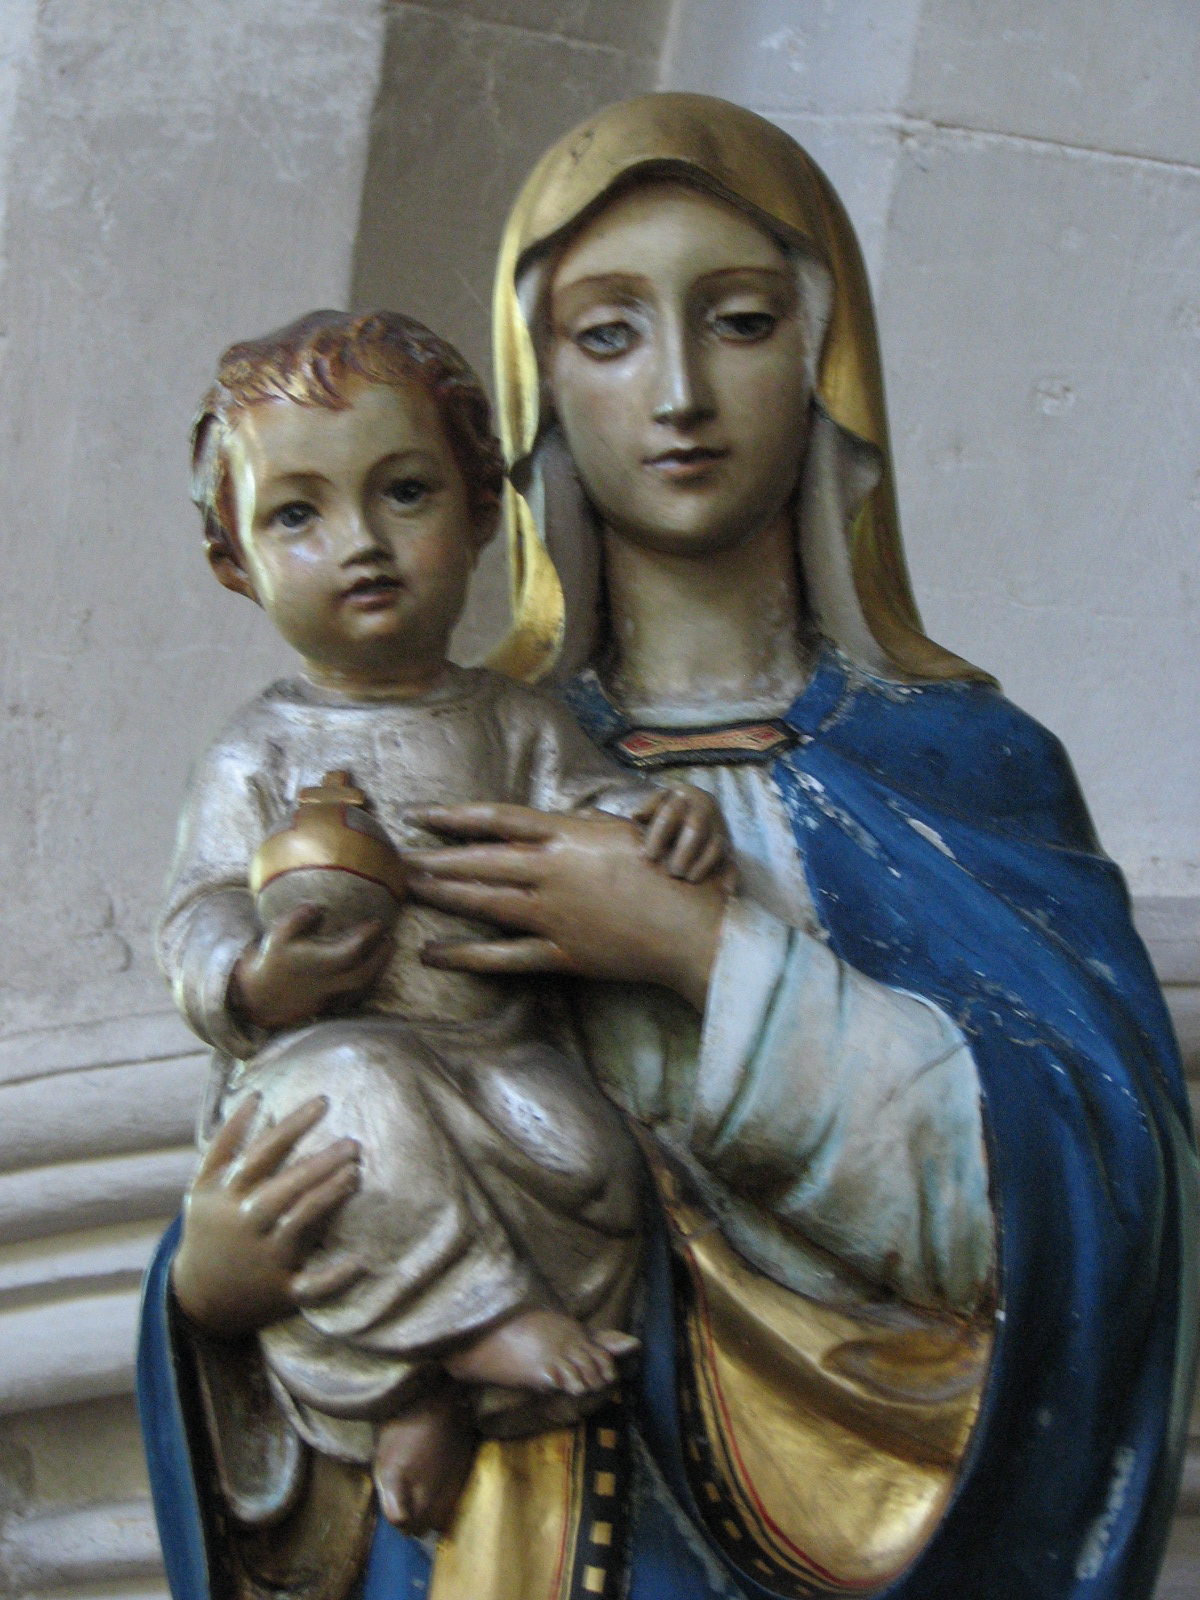 an image of a statue of a woman holding a baby